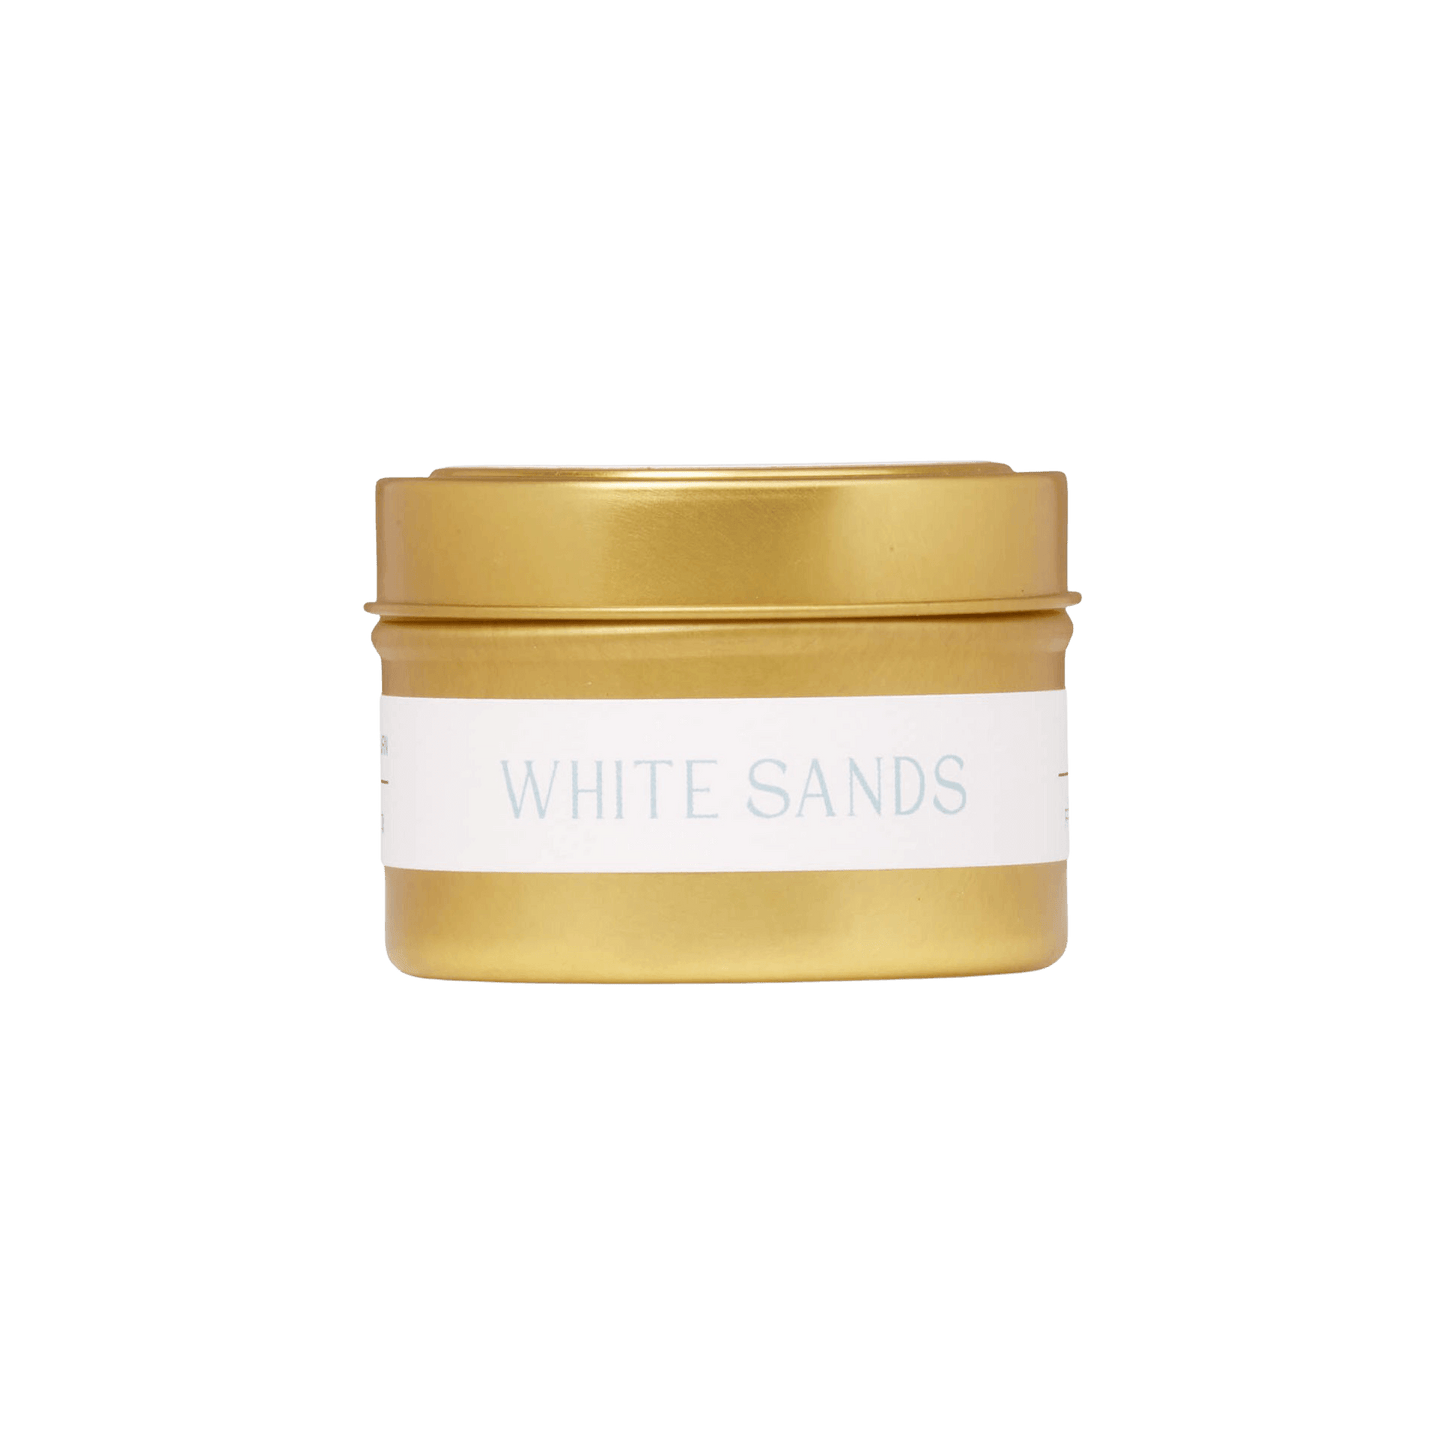 White Sands Candle - The Roosevelts Candle Co.